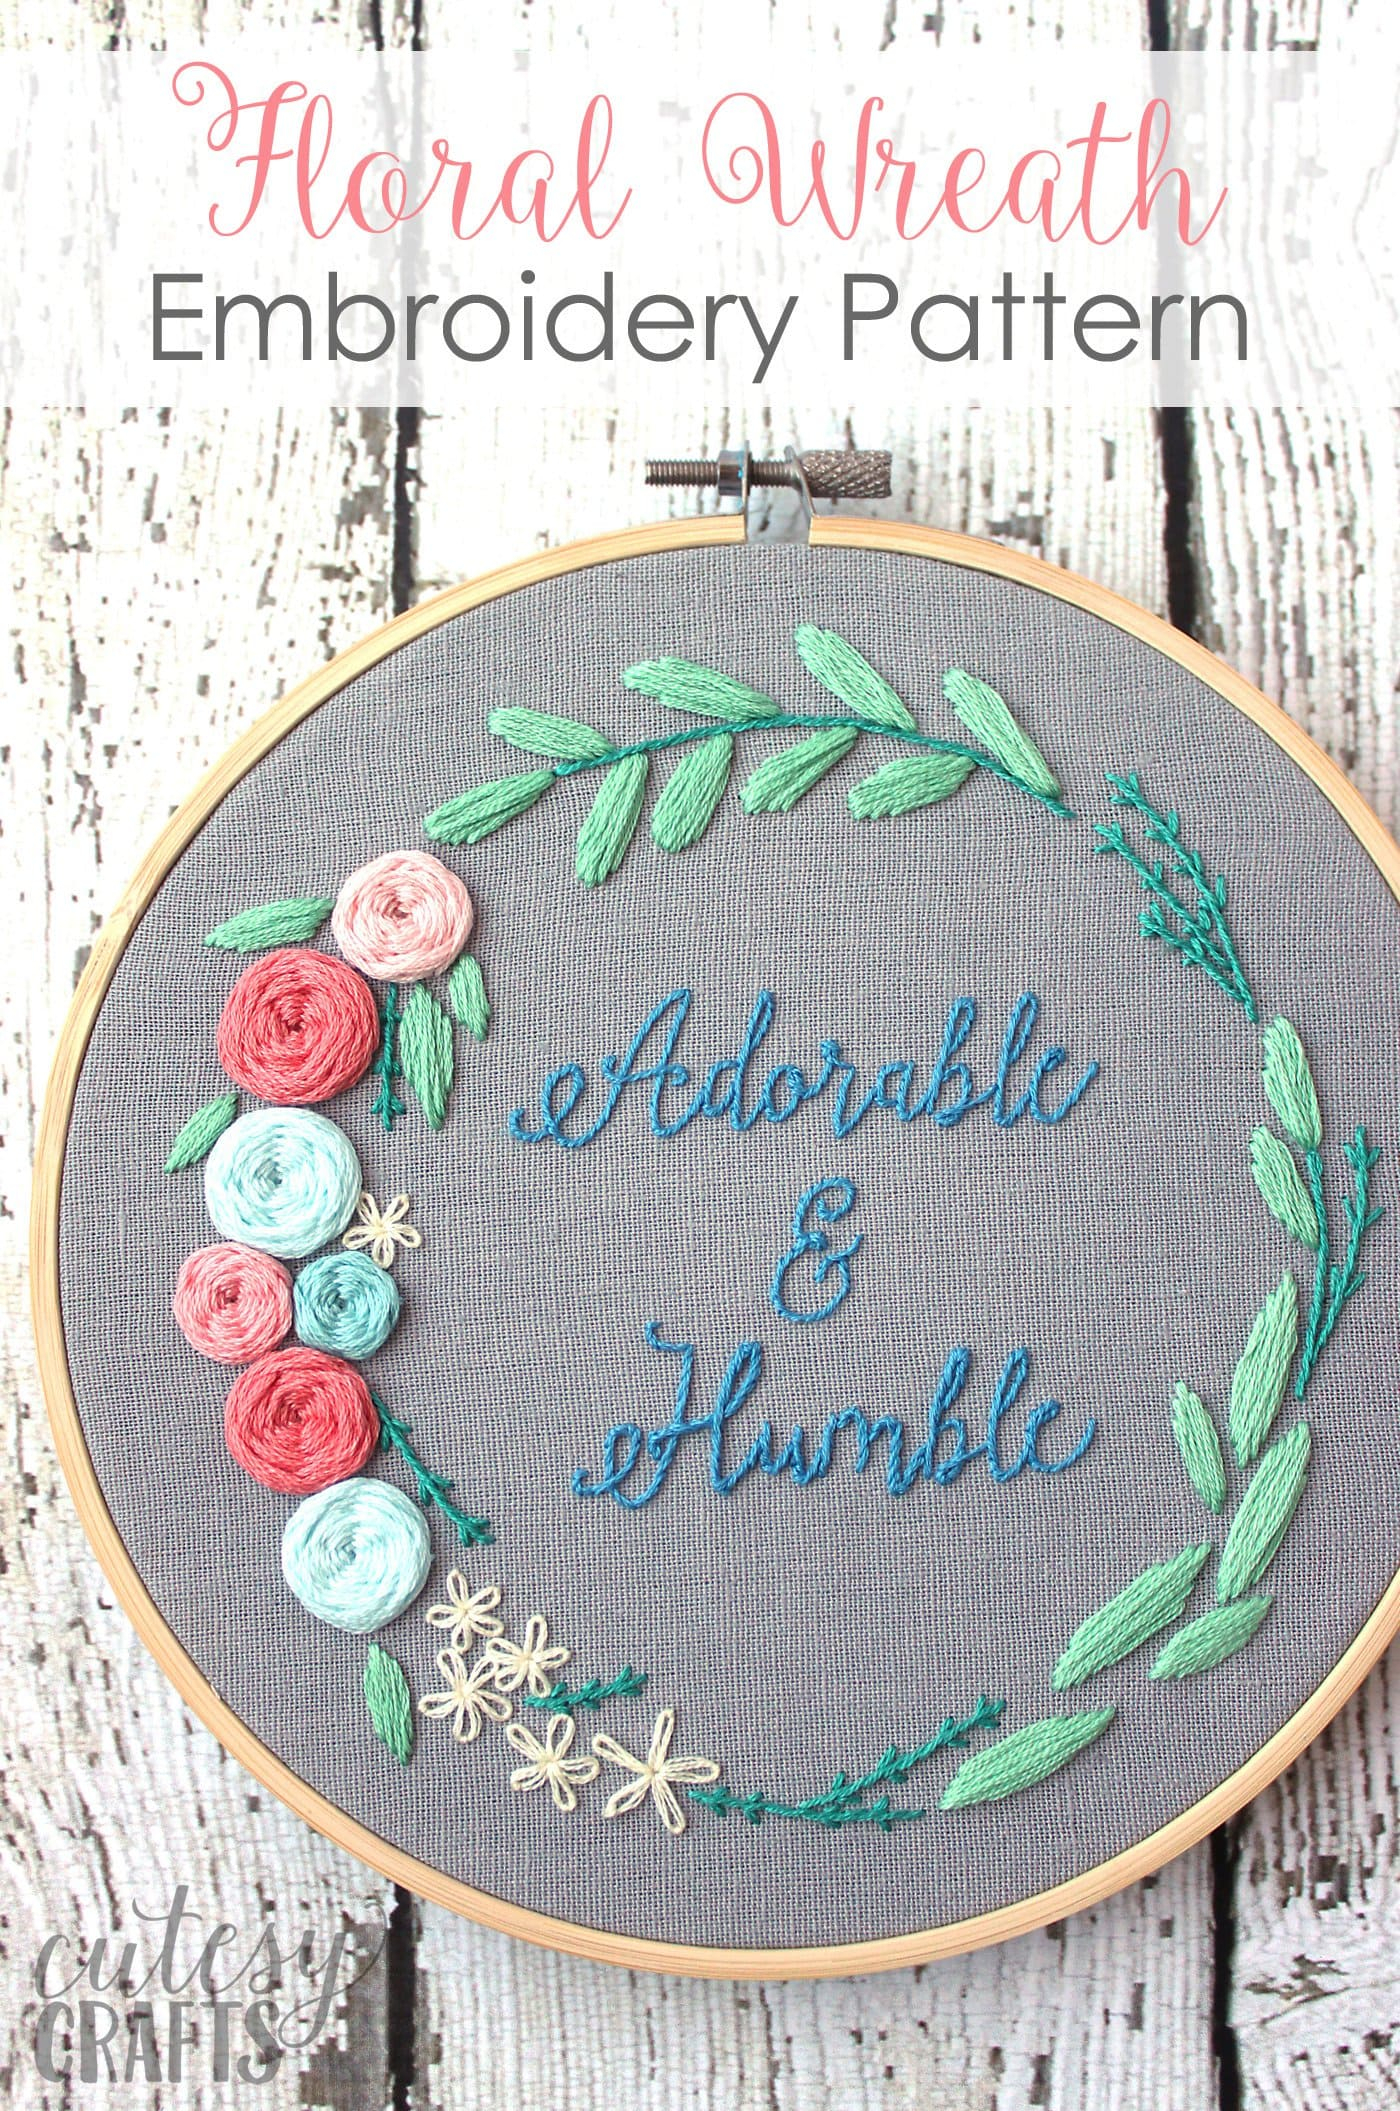 Hand Embroidery Letters Patterns Free Adorable And Humble Free Floral Wreath Hand Embroidery Pattern